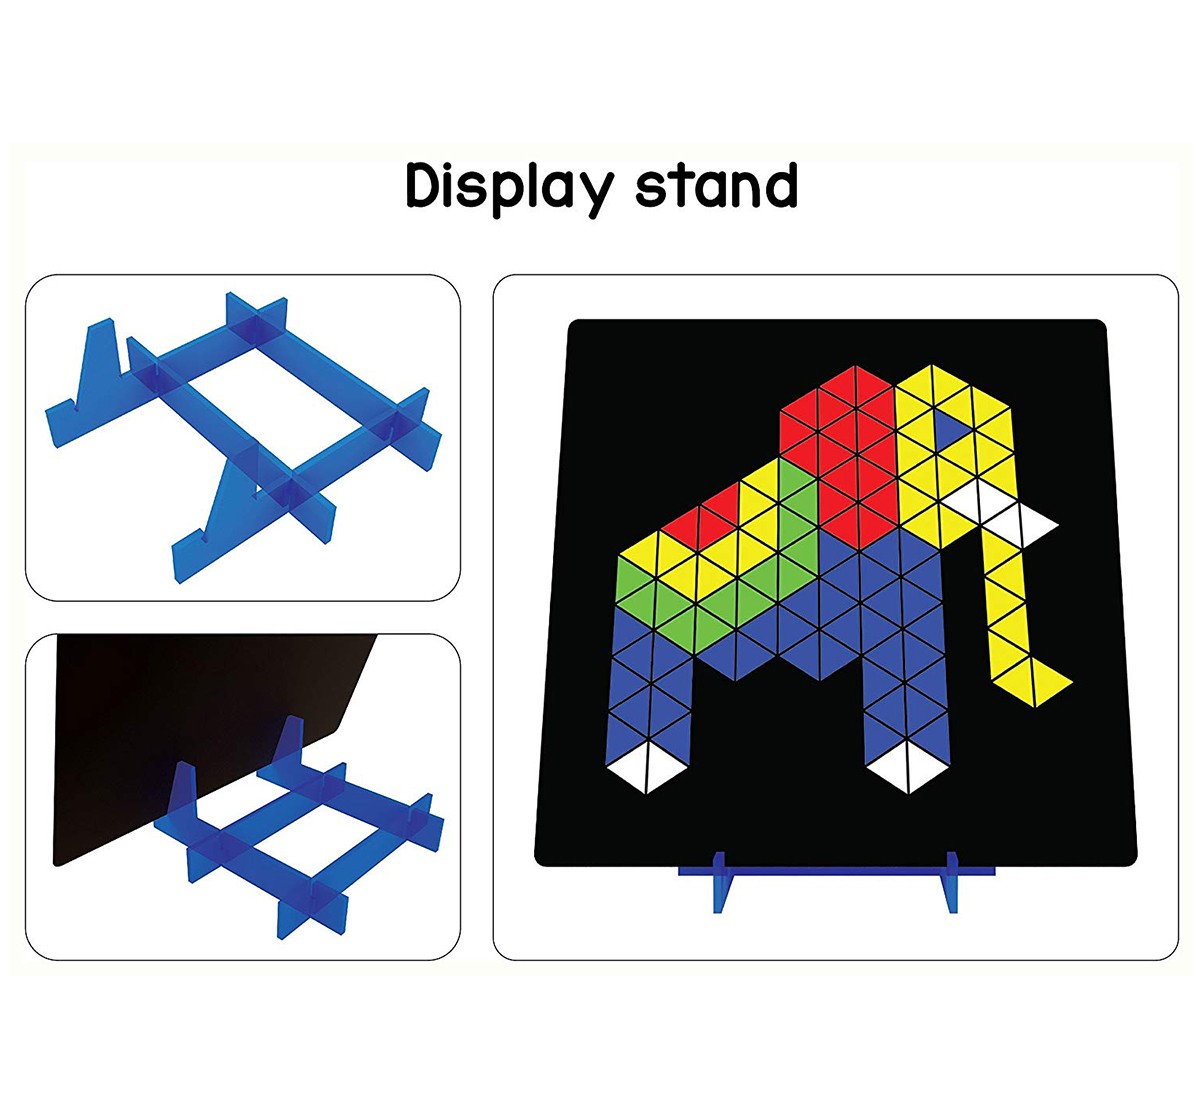 Play Panda Magnetic Puzzles Triangles With 400 Magnets, 200 Puzzles, Magnetic Board And Display Stand,  4Y+ (Multicolor)